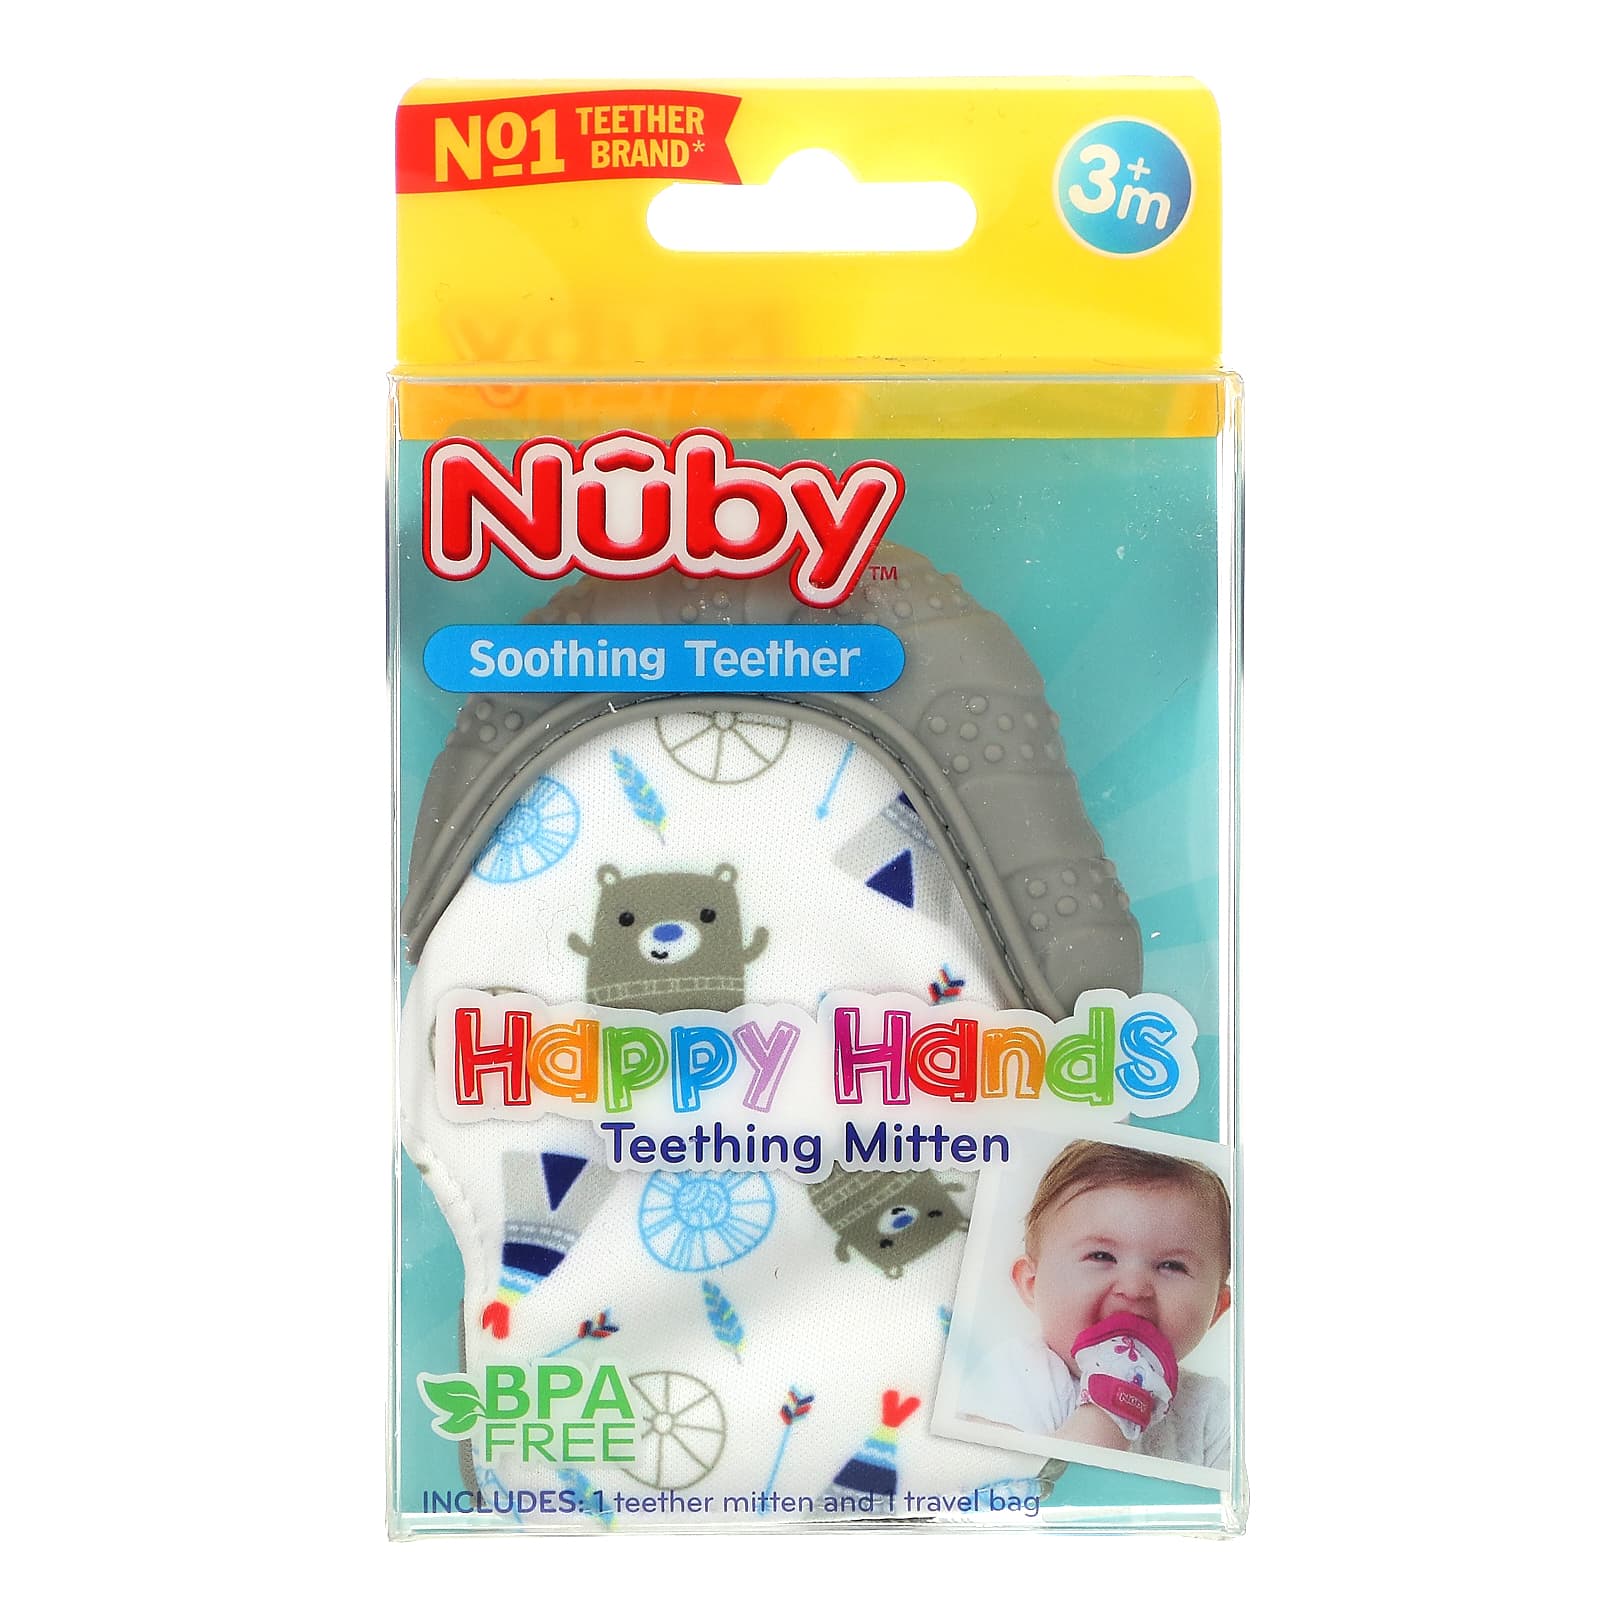 Aqual Owls Nuby Happy Hands Soothing Teething Mitten with Hygienic Travel Bag 